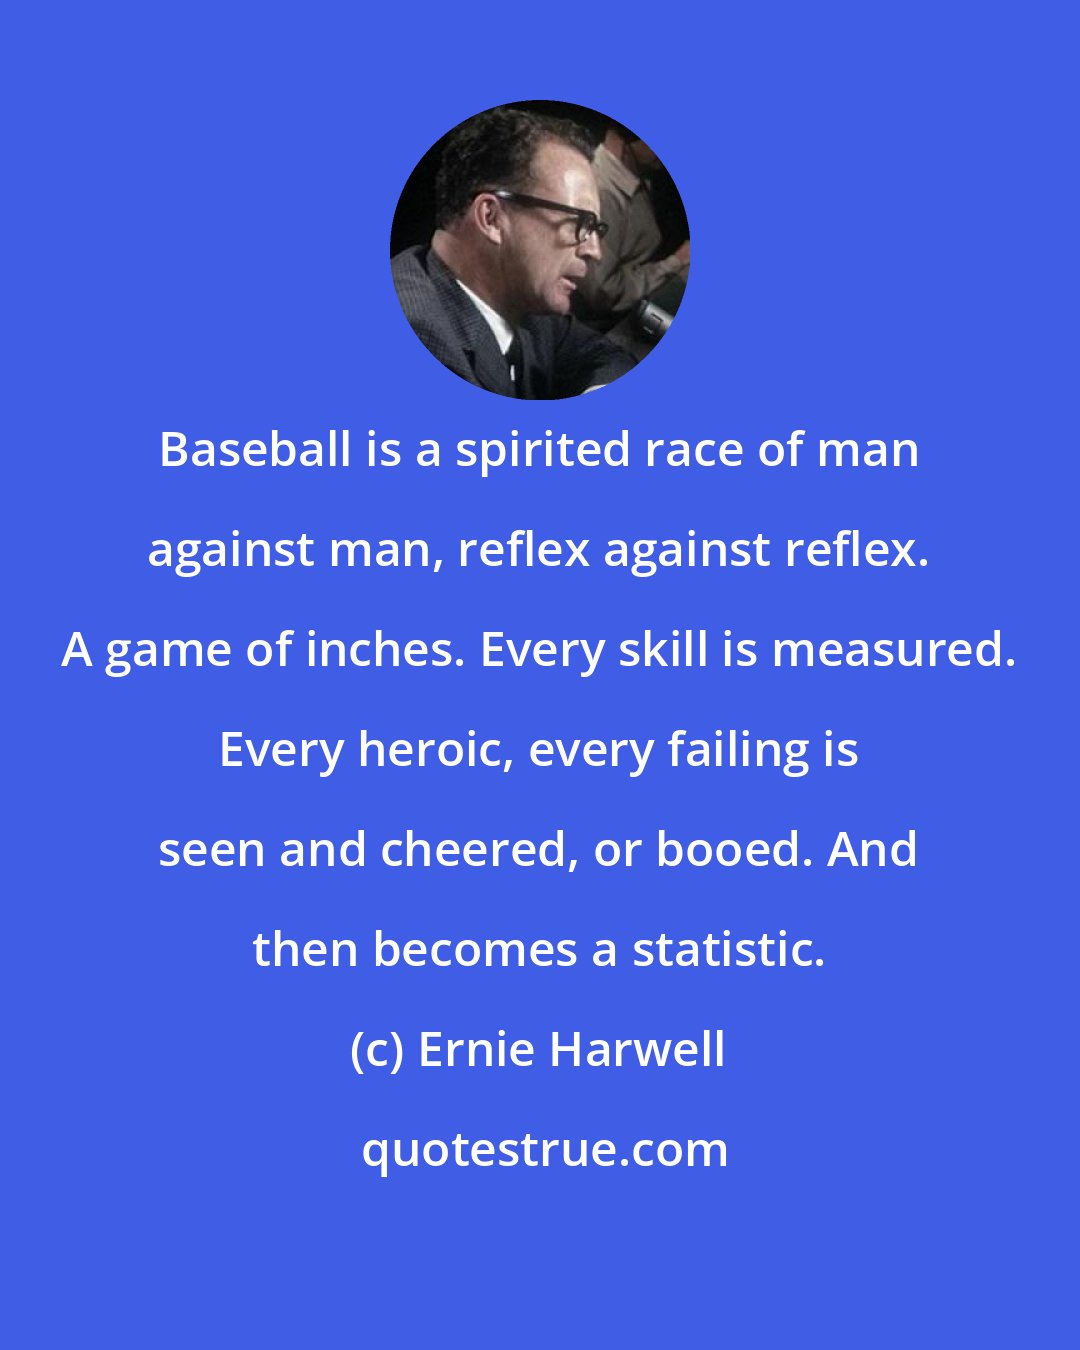 Ernie Harwell: Baseball is a spirited race of man against man, reflex against reflex. A game of inches. Every skill is measured. Every heroic, every failing is seen and cheered, or booed. And then becomes a statistic.